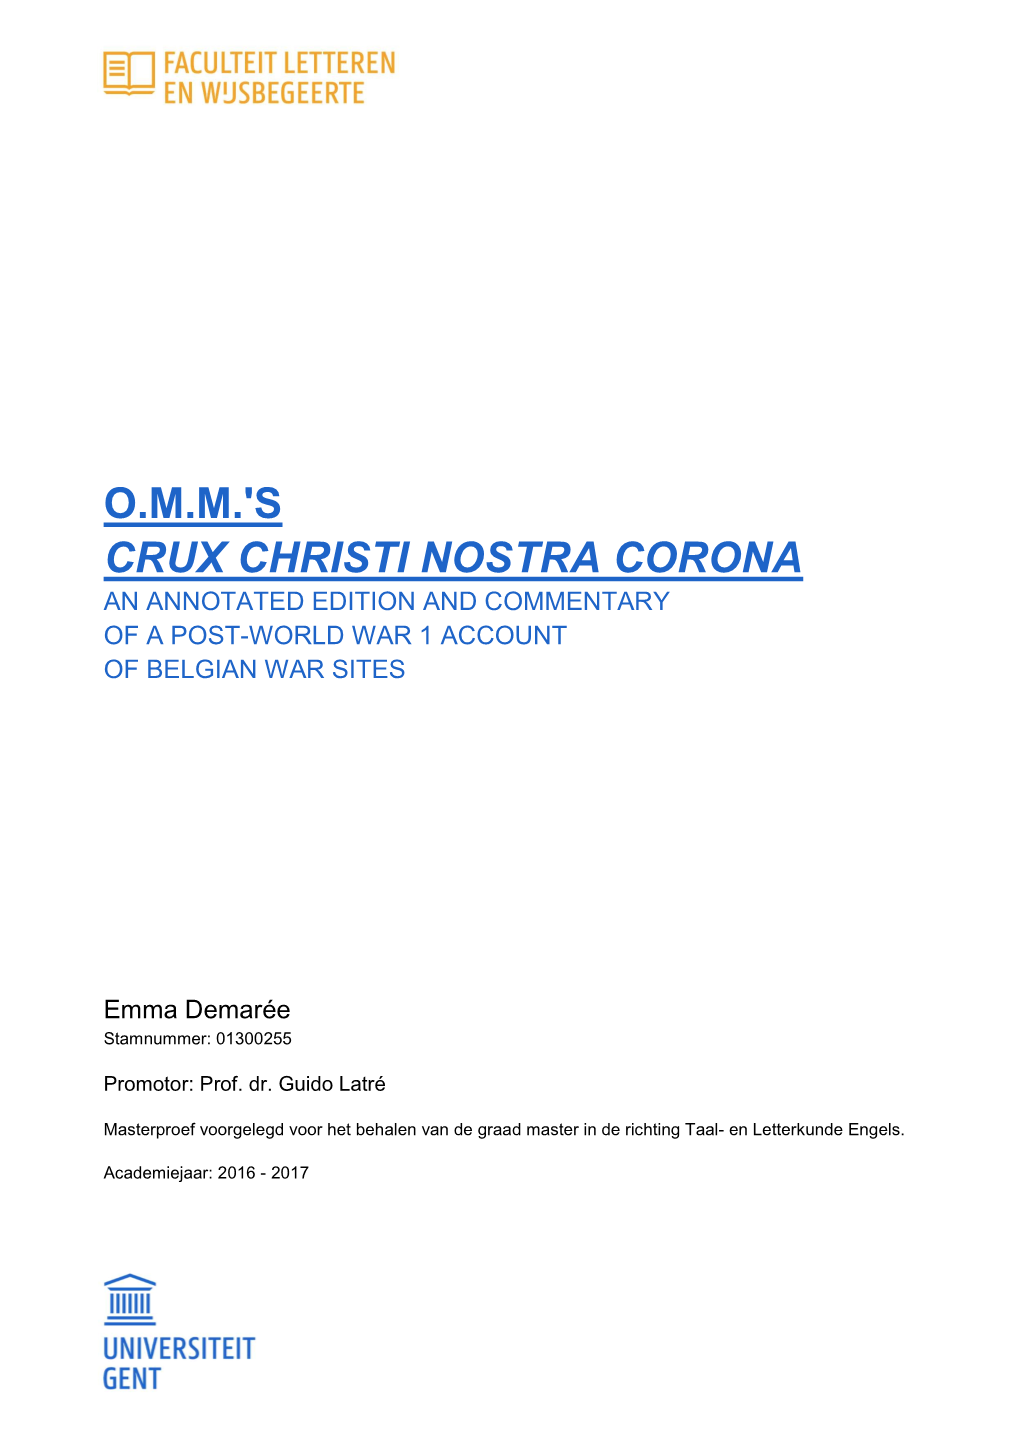 O.M.M.'S Crux Christi Nostra Corona an Annotated Edition and Commentary of a Post-World War 1 Account of Belgian War Sites